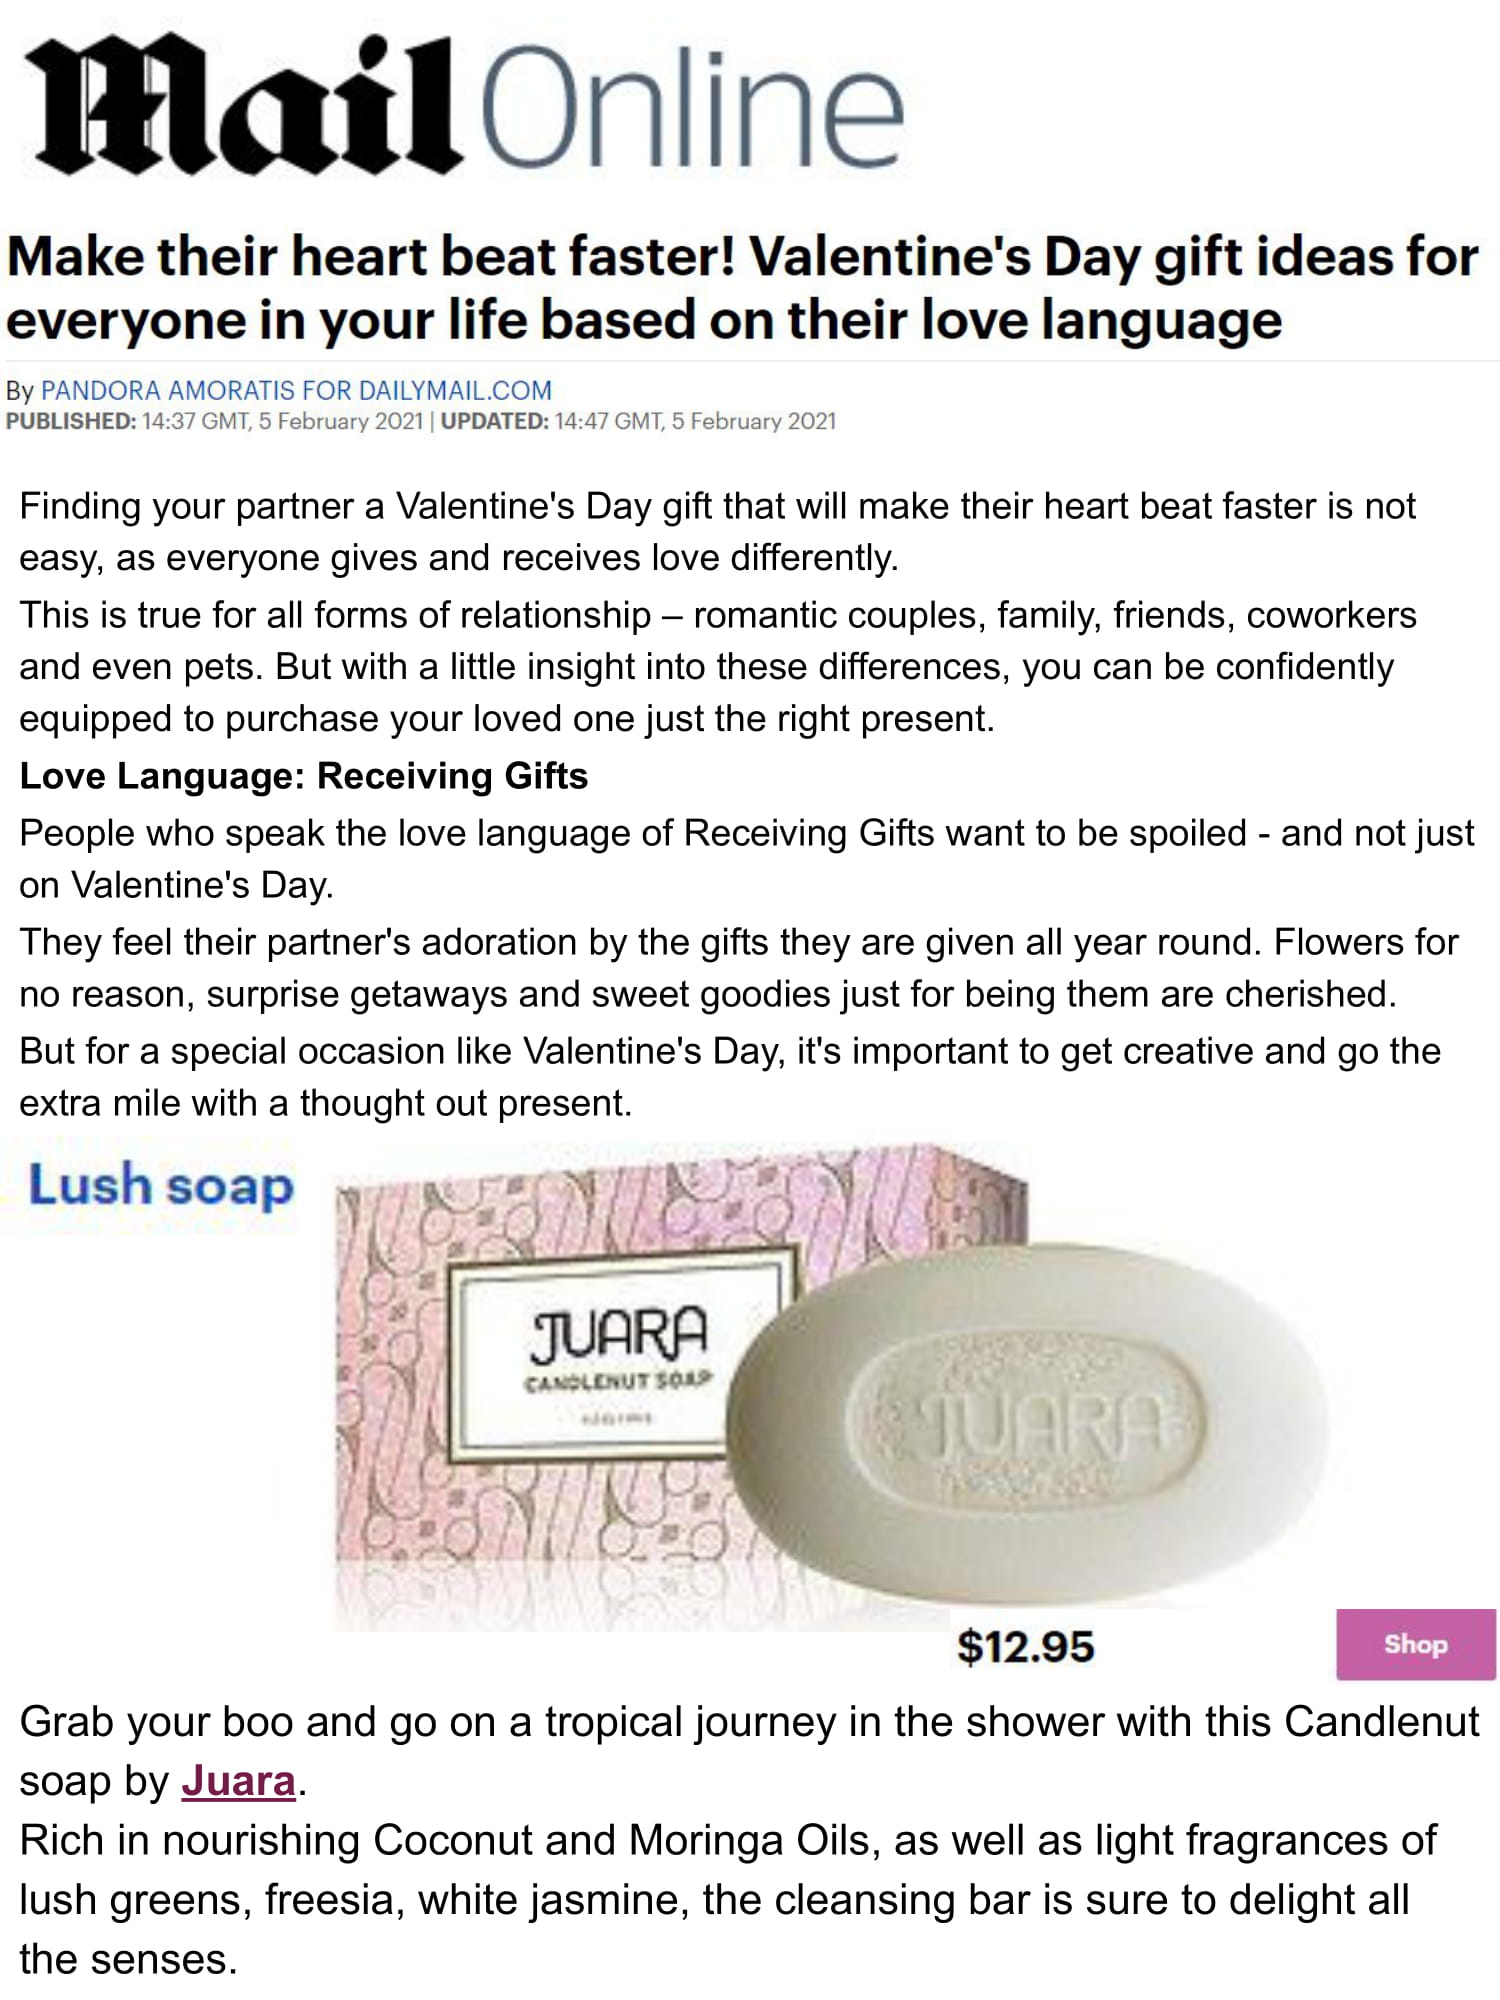 MAIL ONLINE : Make Their Heart Beat Faster! Valentine's Day Gift Ideas For Everyone in Your Life Base on Their Love Language JUARA Skincare